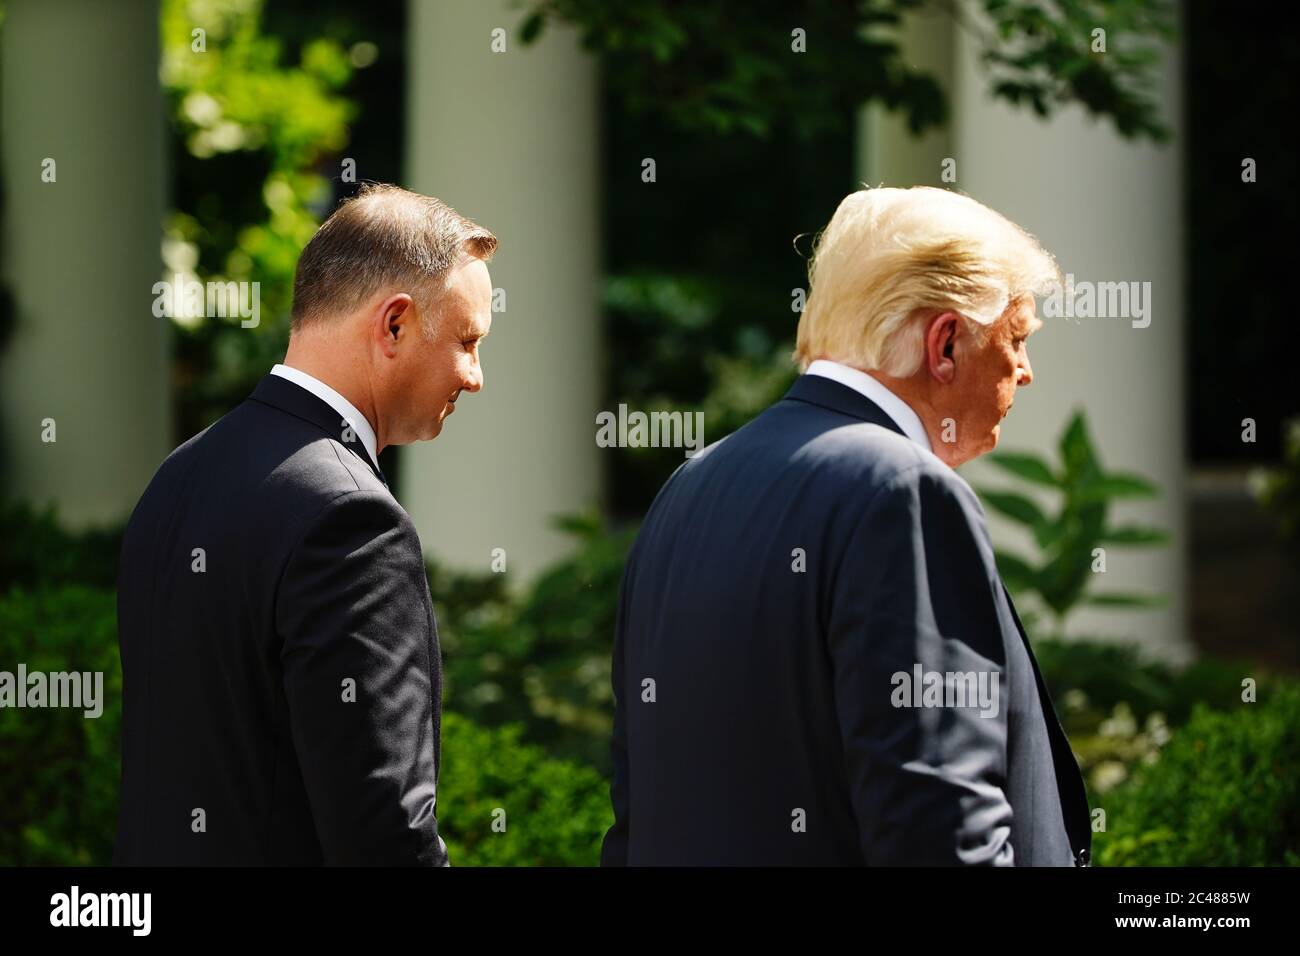 US President Donald J. Trump and Polish President Andrzej Duda (L) depart after holding a joint press conference in the Rose Garden of the White House in Washington, DC, USA, 24 June 2020. Duda, a conservative nationalist facing a tight re-election race back home, is the first foreign leader to visit the White House in more than three months.Credit: Jim LoScalzo/Pool via CNP /MediaPunch Stock Photo